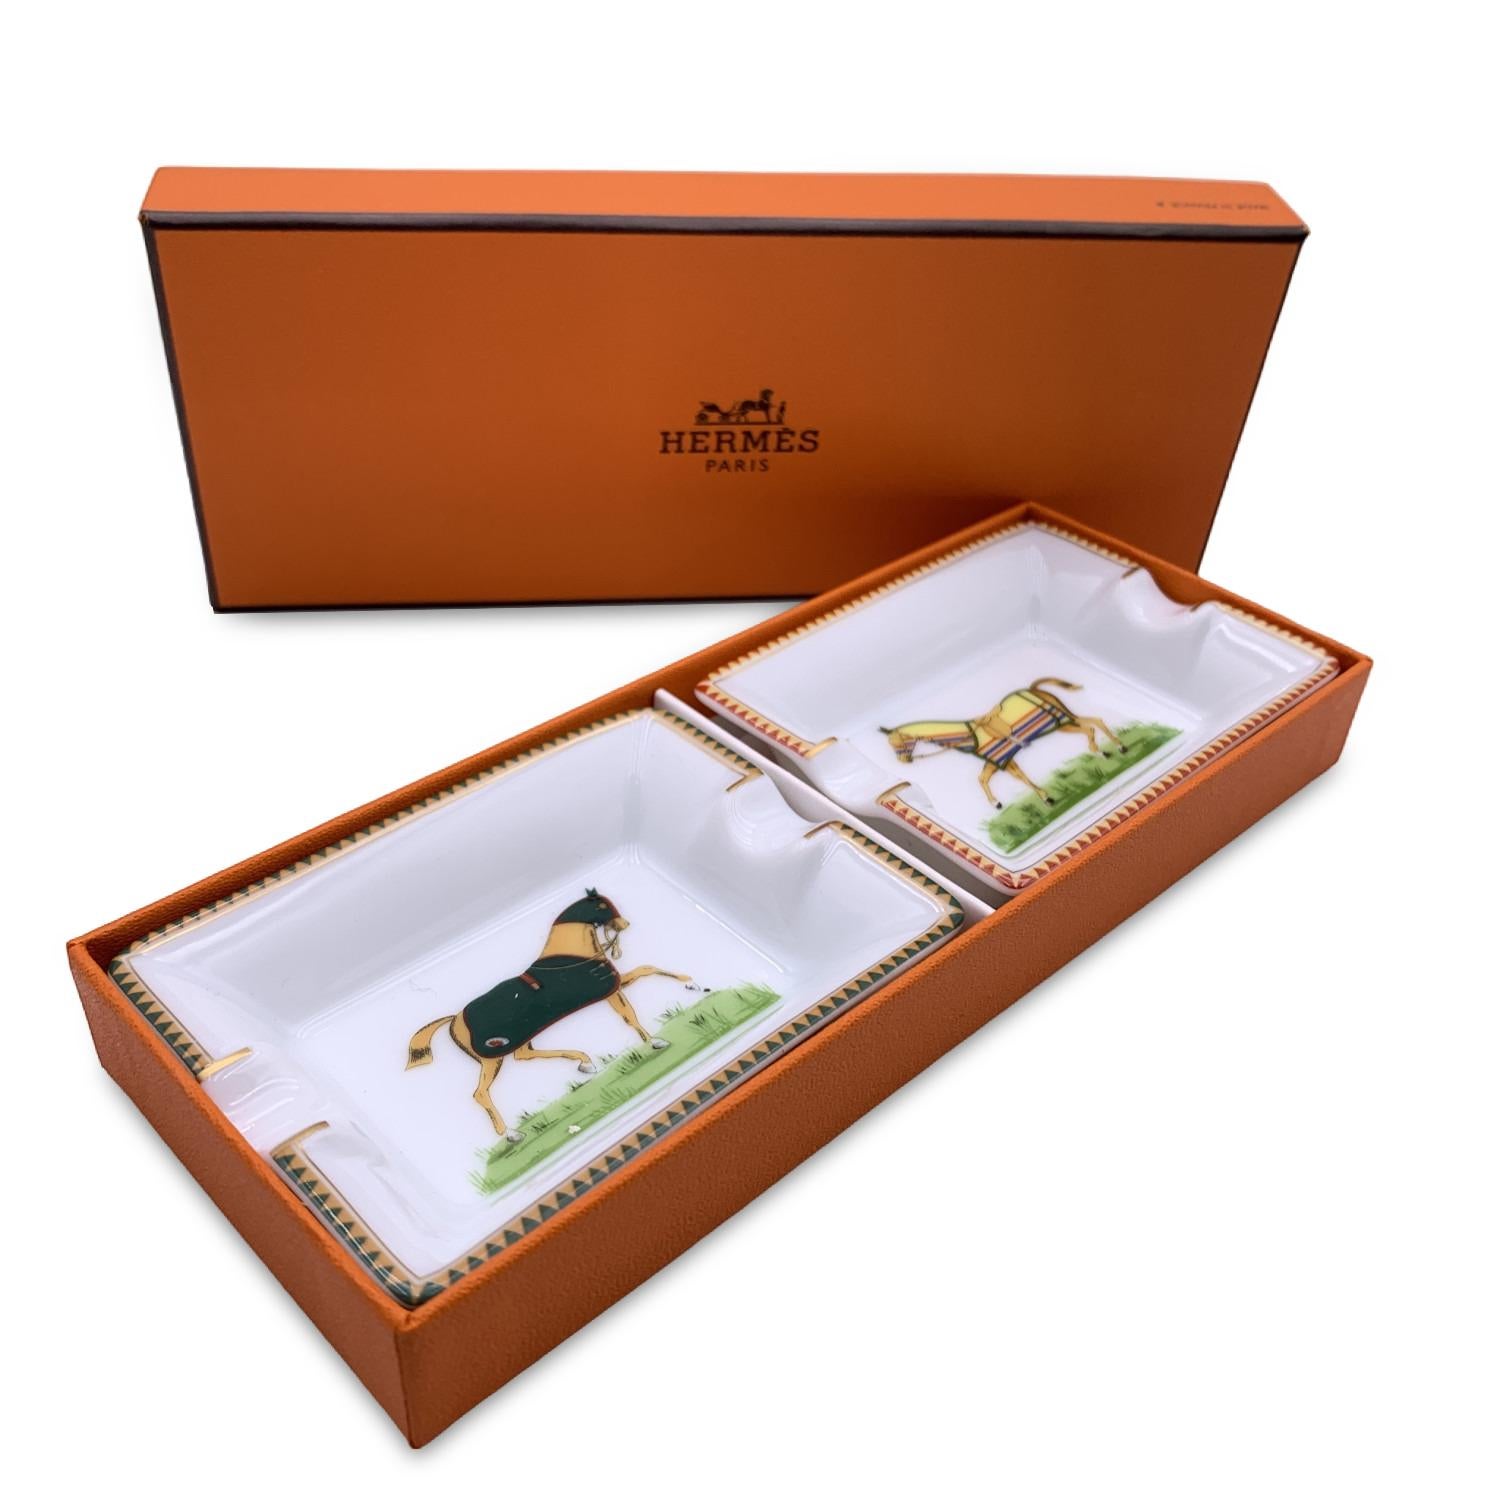 Hermes Vintage set of 2 mini ashtrays Rectangular shape. White porcelain decorated with a print of galloping horses in the centre of them. One horse wears a black blanket and one horse wears a yellow blanket with stripes. Each ashtray is marked with